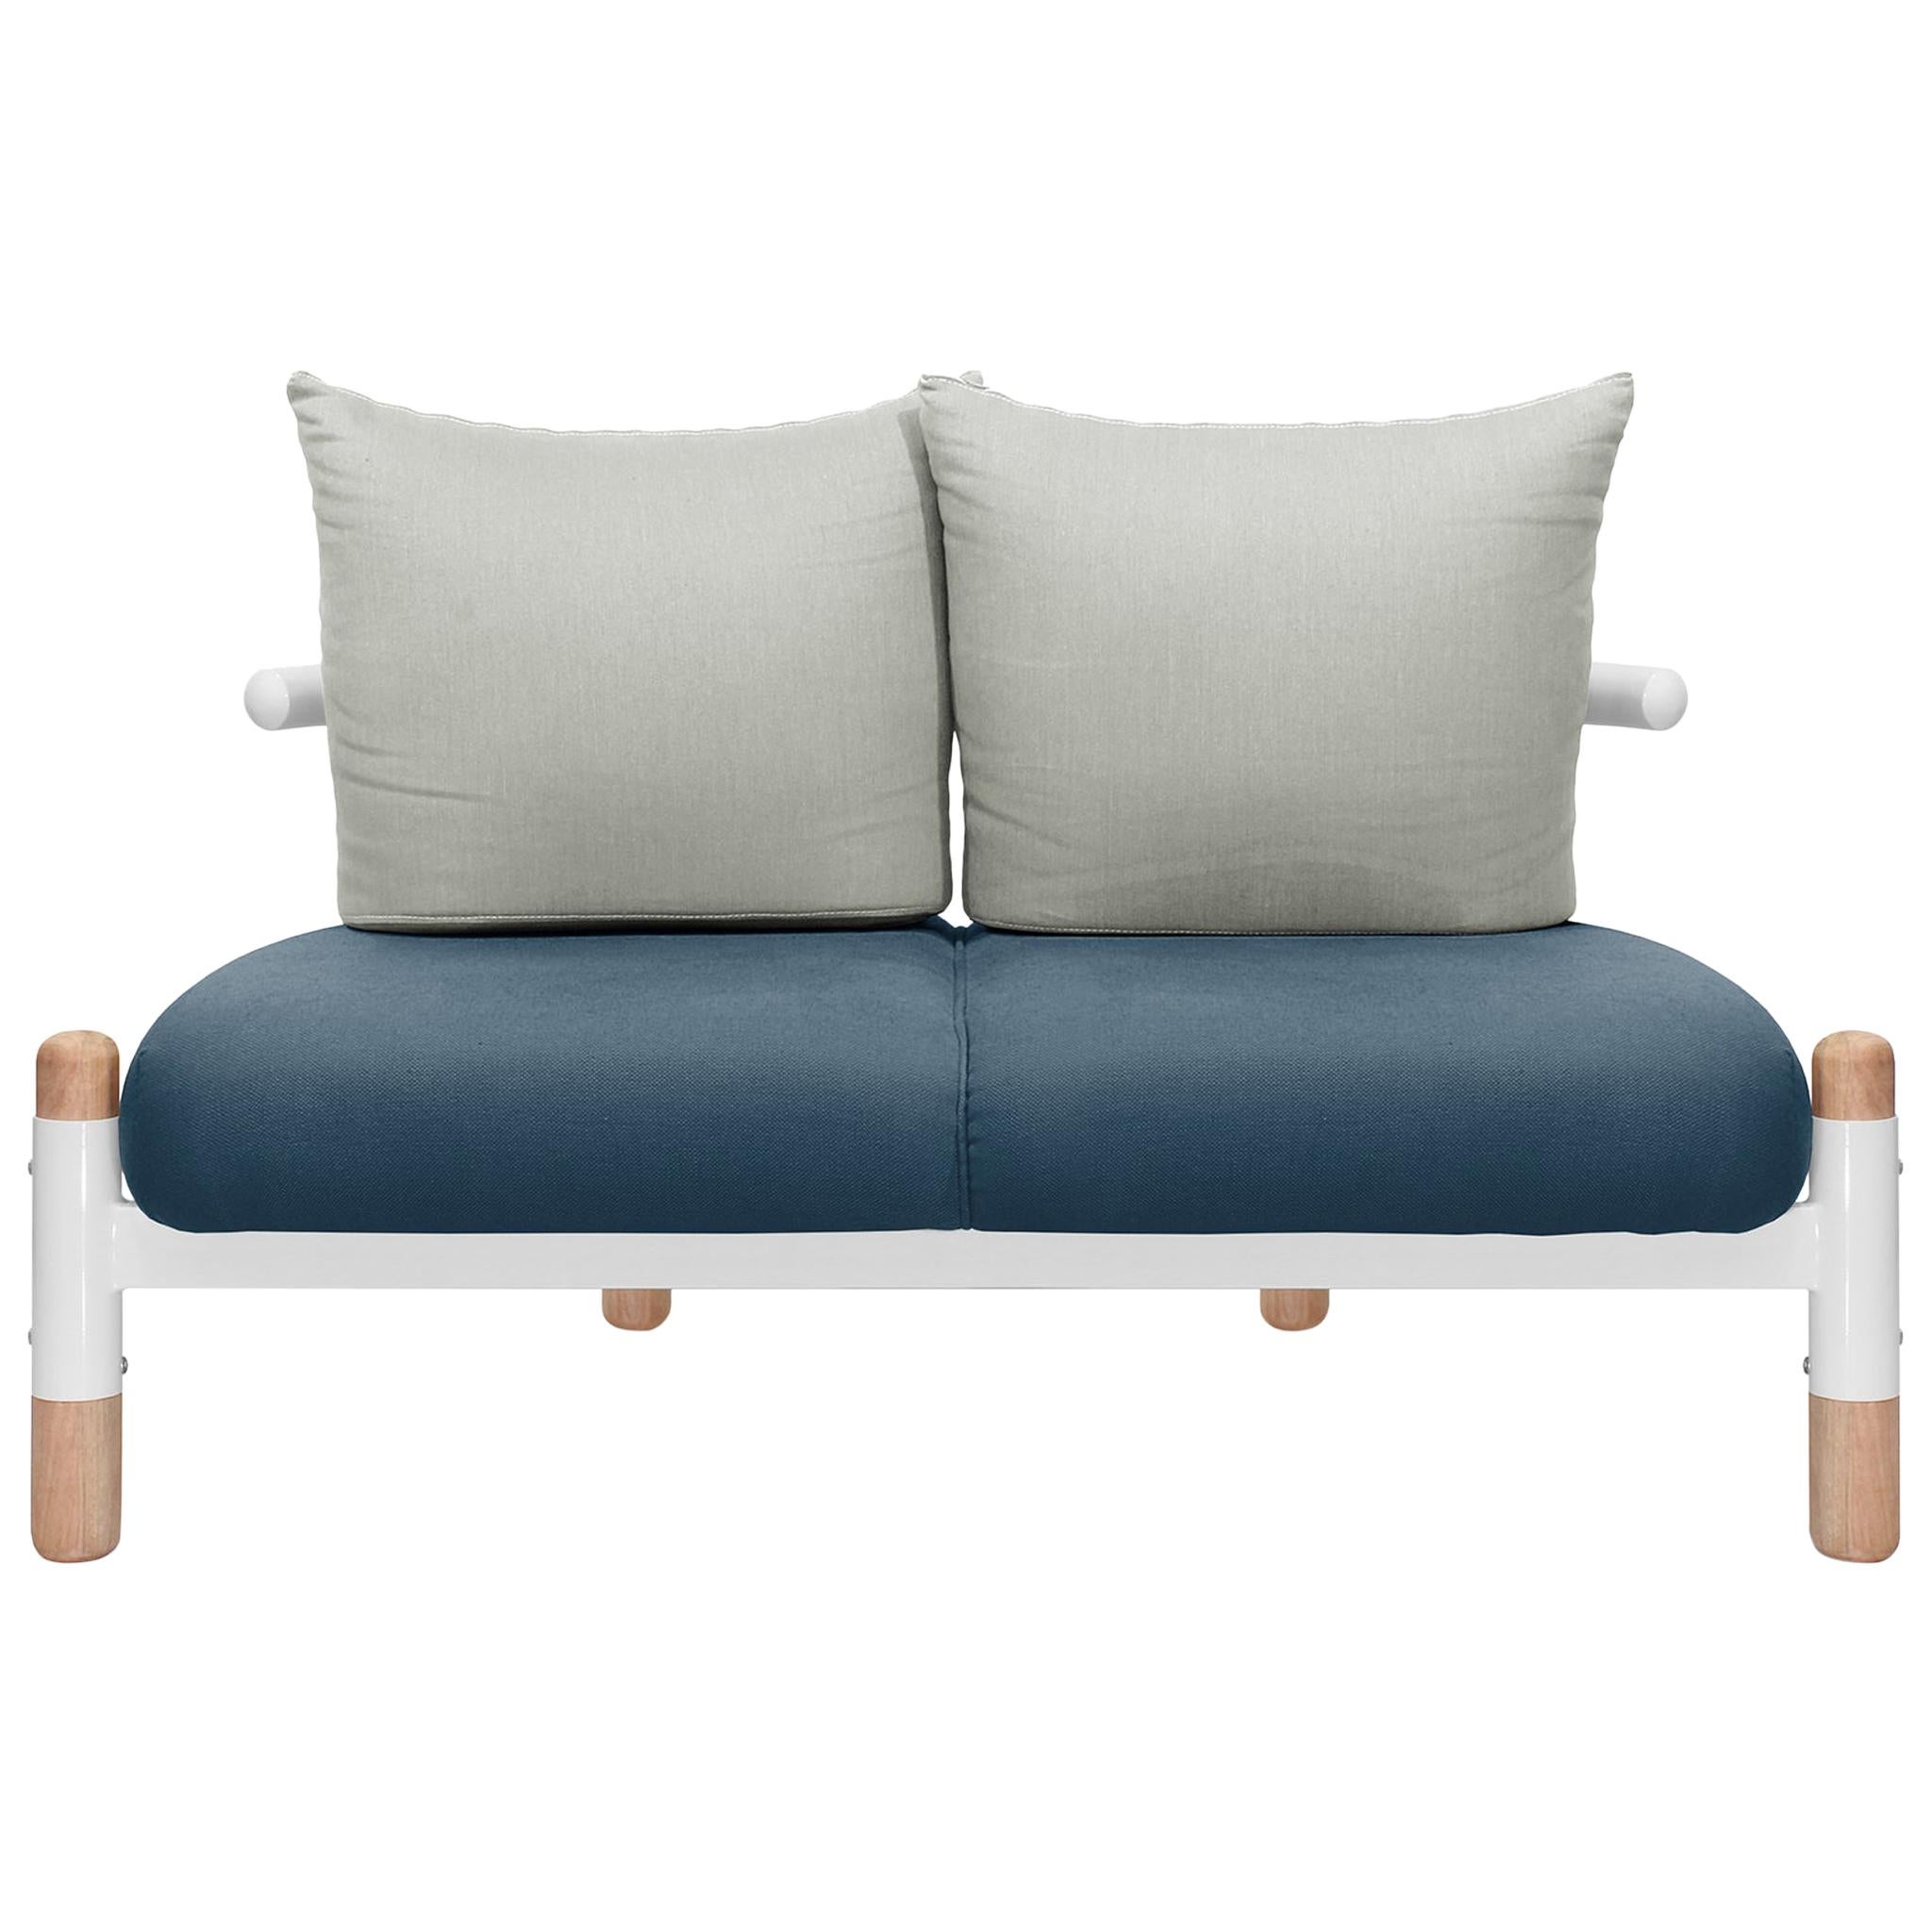 Blue PK15 Two-Seat Sofa, Carbon Steel Structure & Wood Legs by Paulo Kobylka